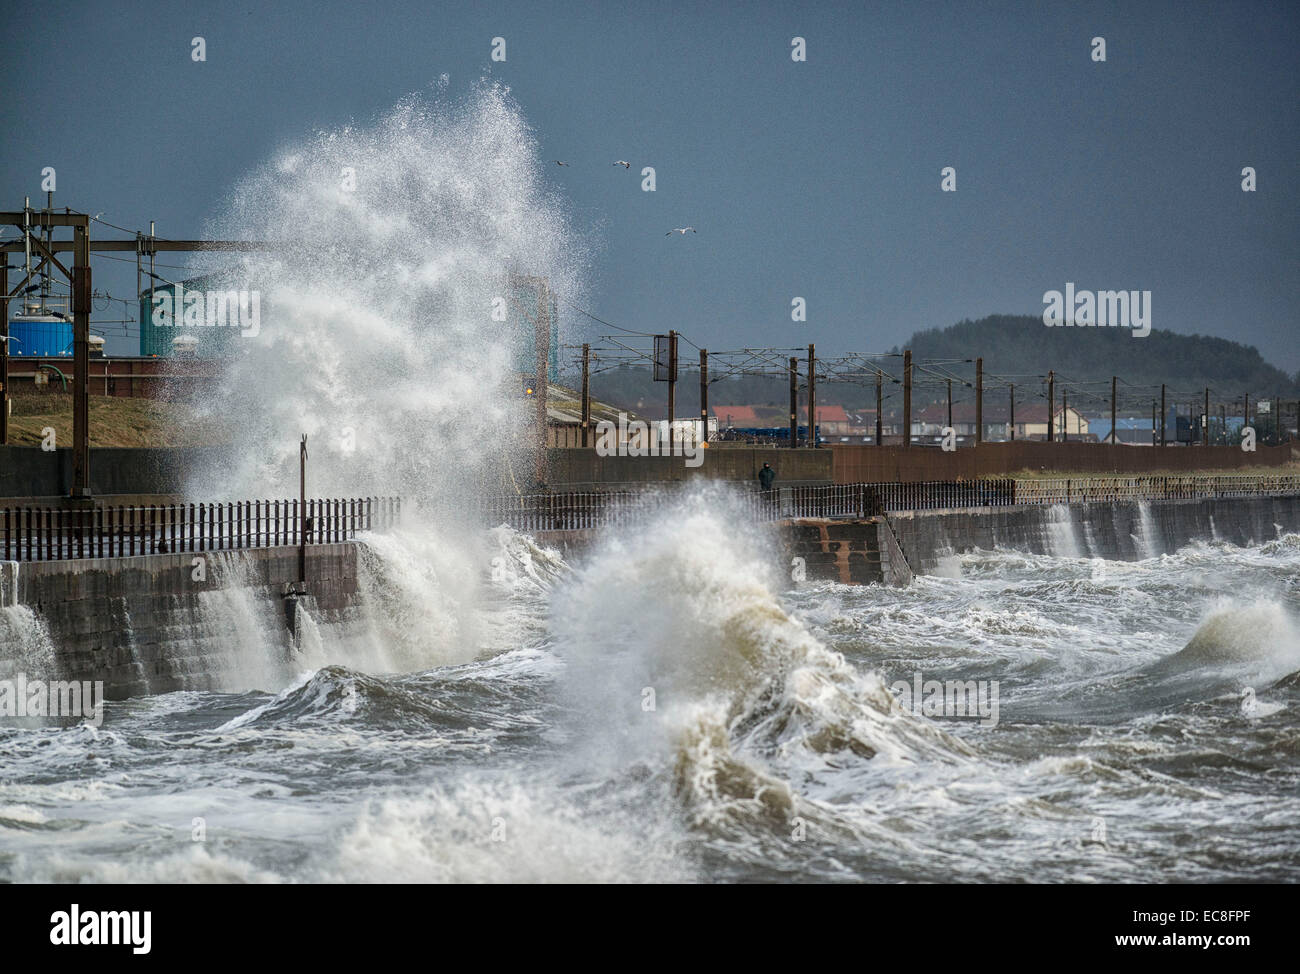 Men dodge the waves as they crash over the promenade wall on December 10, 2014 in Saltcoats, Scotland. Stock Photo